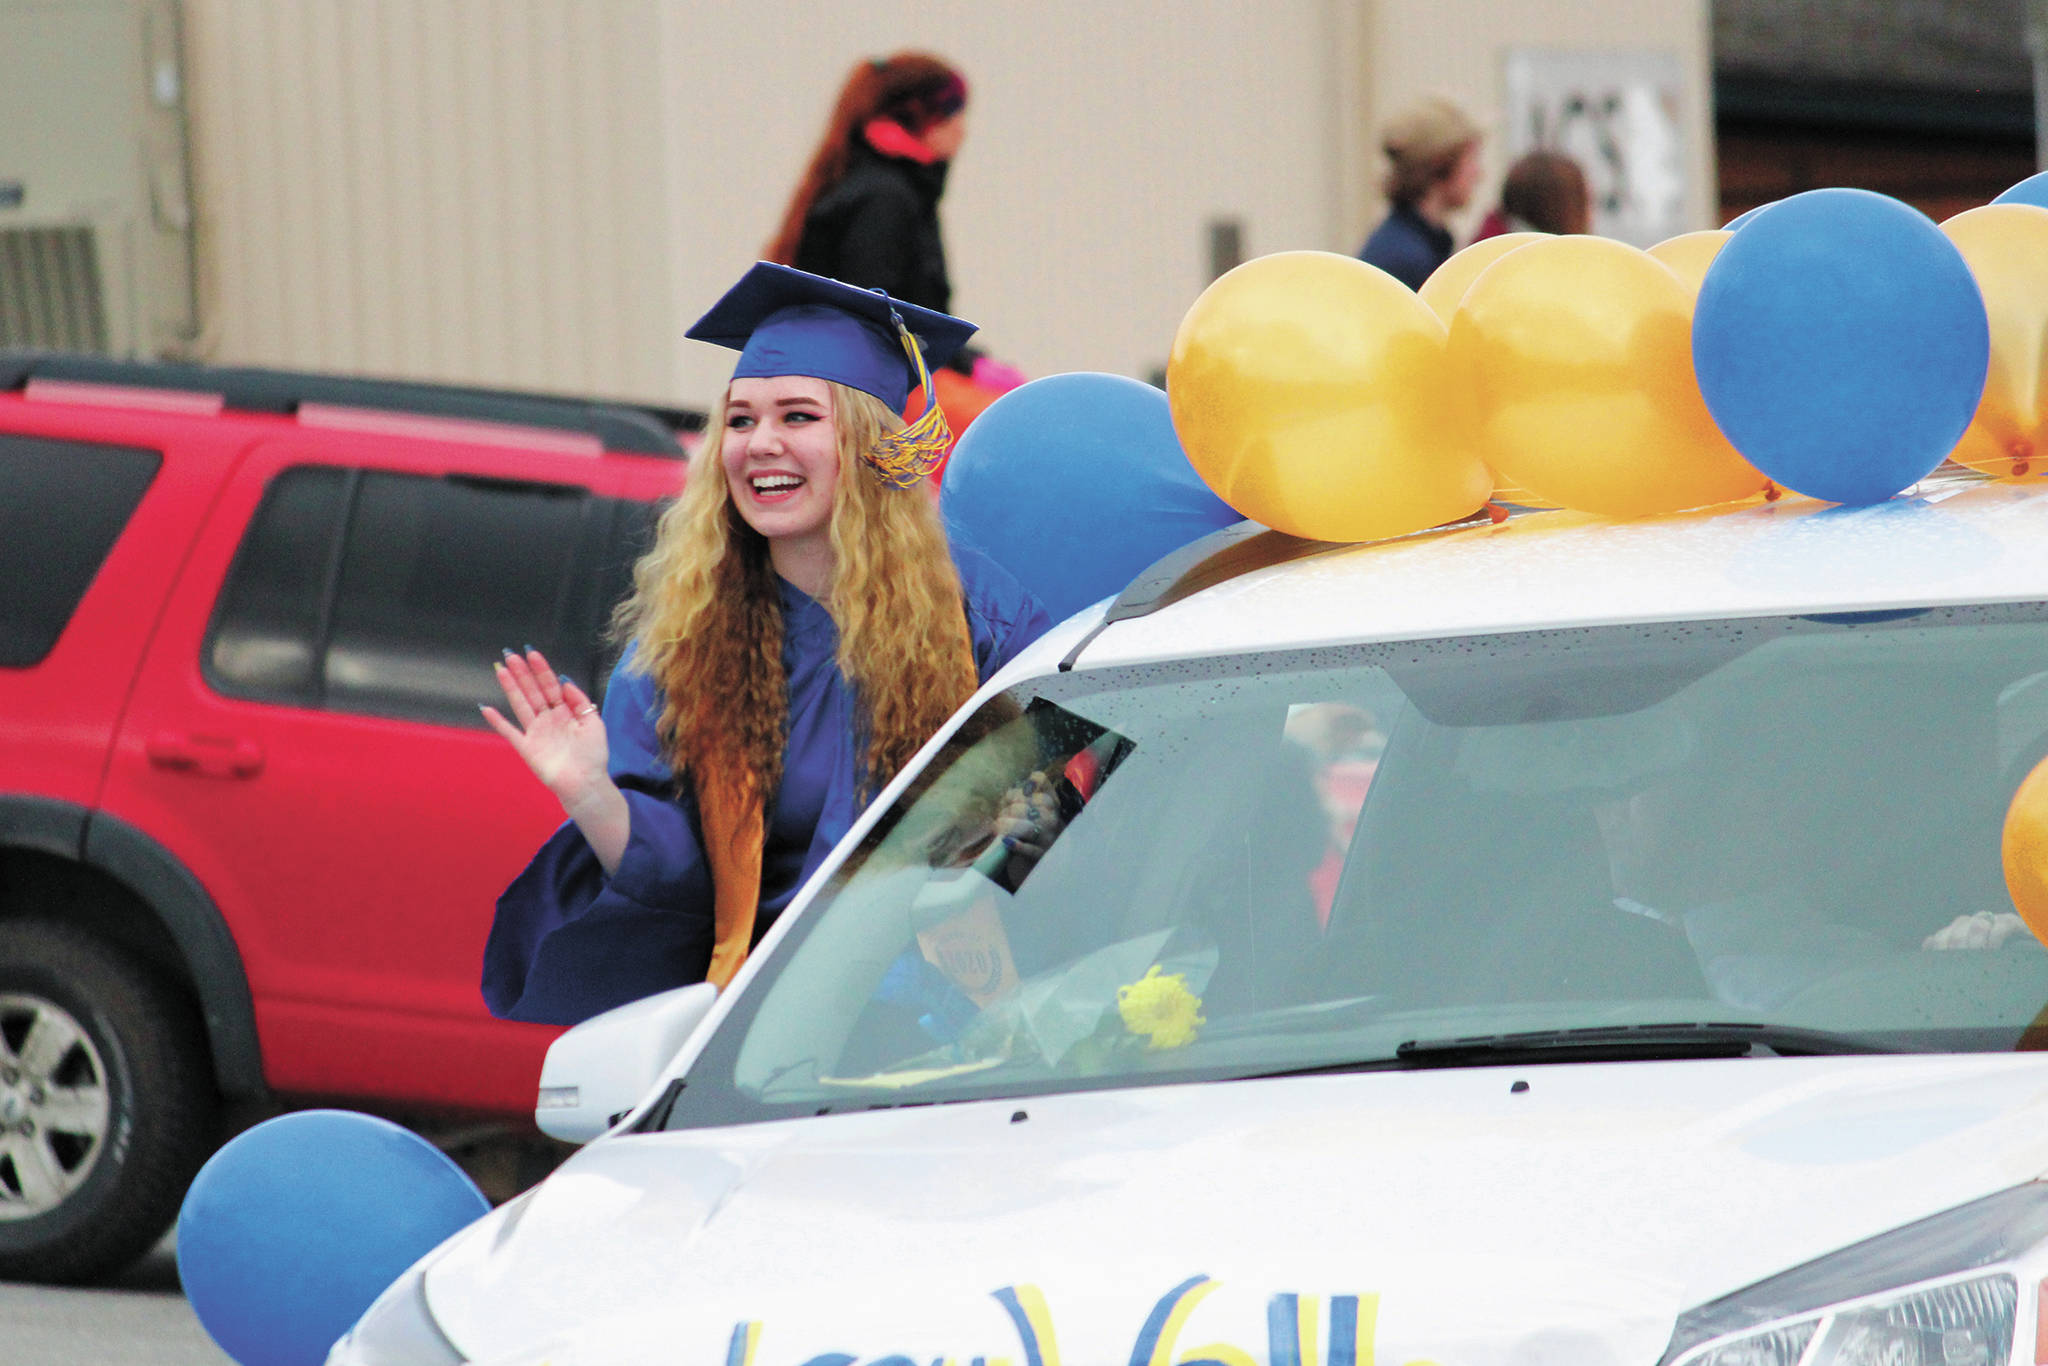 Homer High School graduate Audrey Wallace waves to onlookers while participating in a procession through town with the class of 2020 following their commencement ceremony Monday, May 18, 2020 in Homer, Alaska. (Photo by Megan Pacer/Homer News)